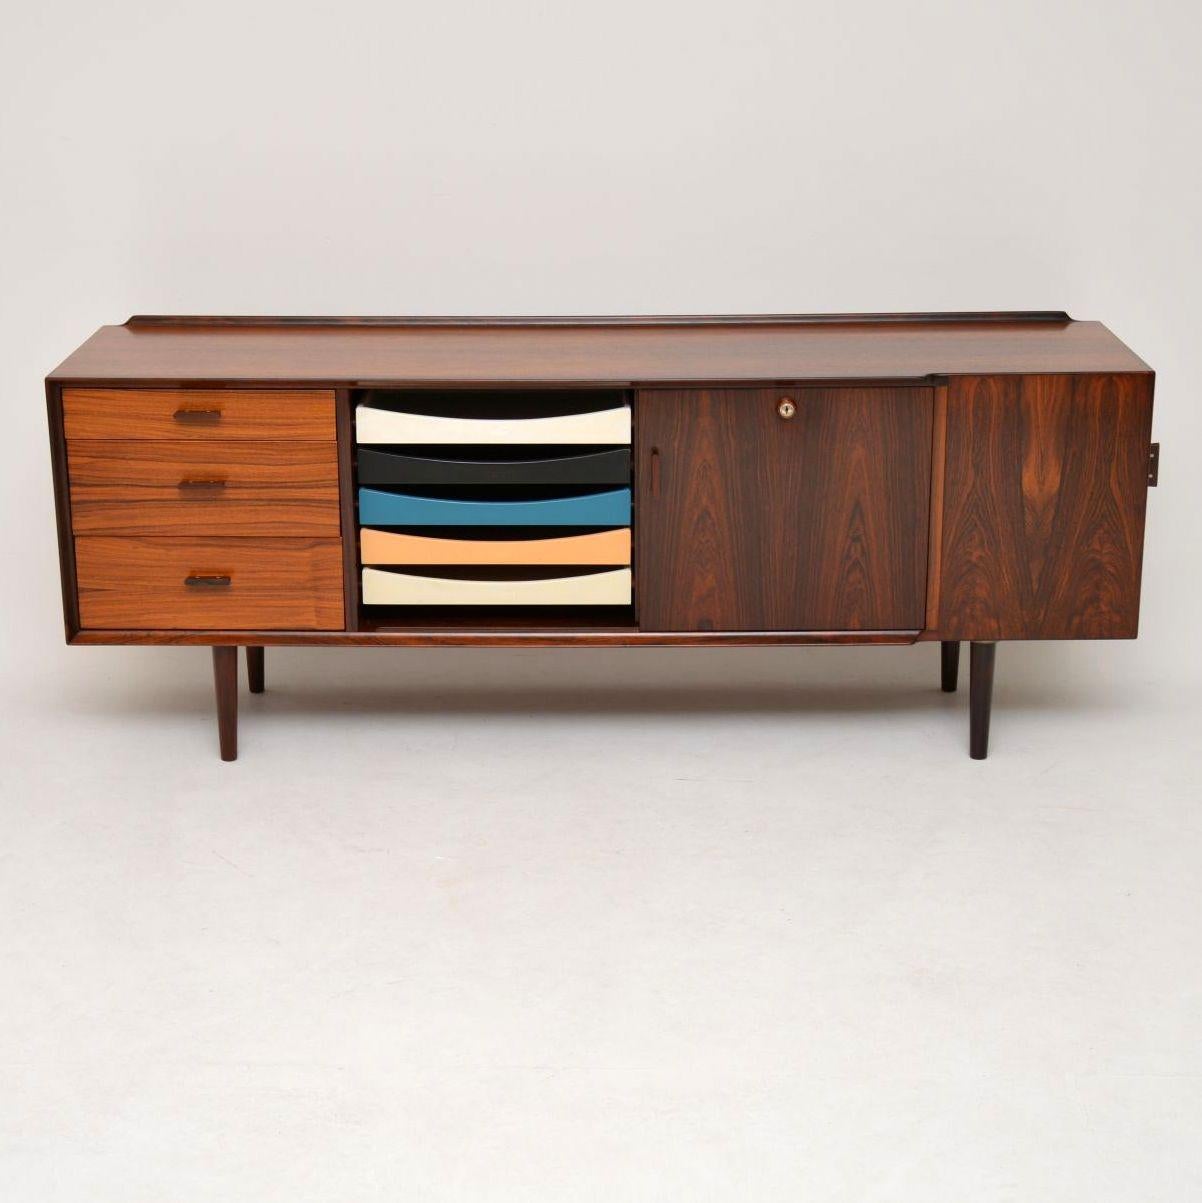 A magnificent vintage Danish sideboard, this was designed by Arne Vodder and made by Sibast in the 1960s. It has colourful slide out tray drawers in the middle, with drawers and a cabinet on either side, there is also another built in cabinet that